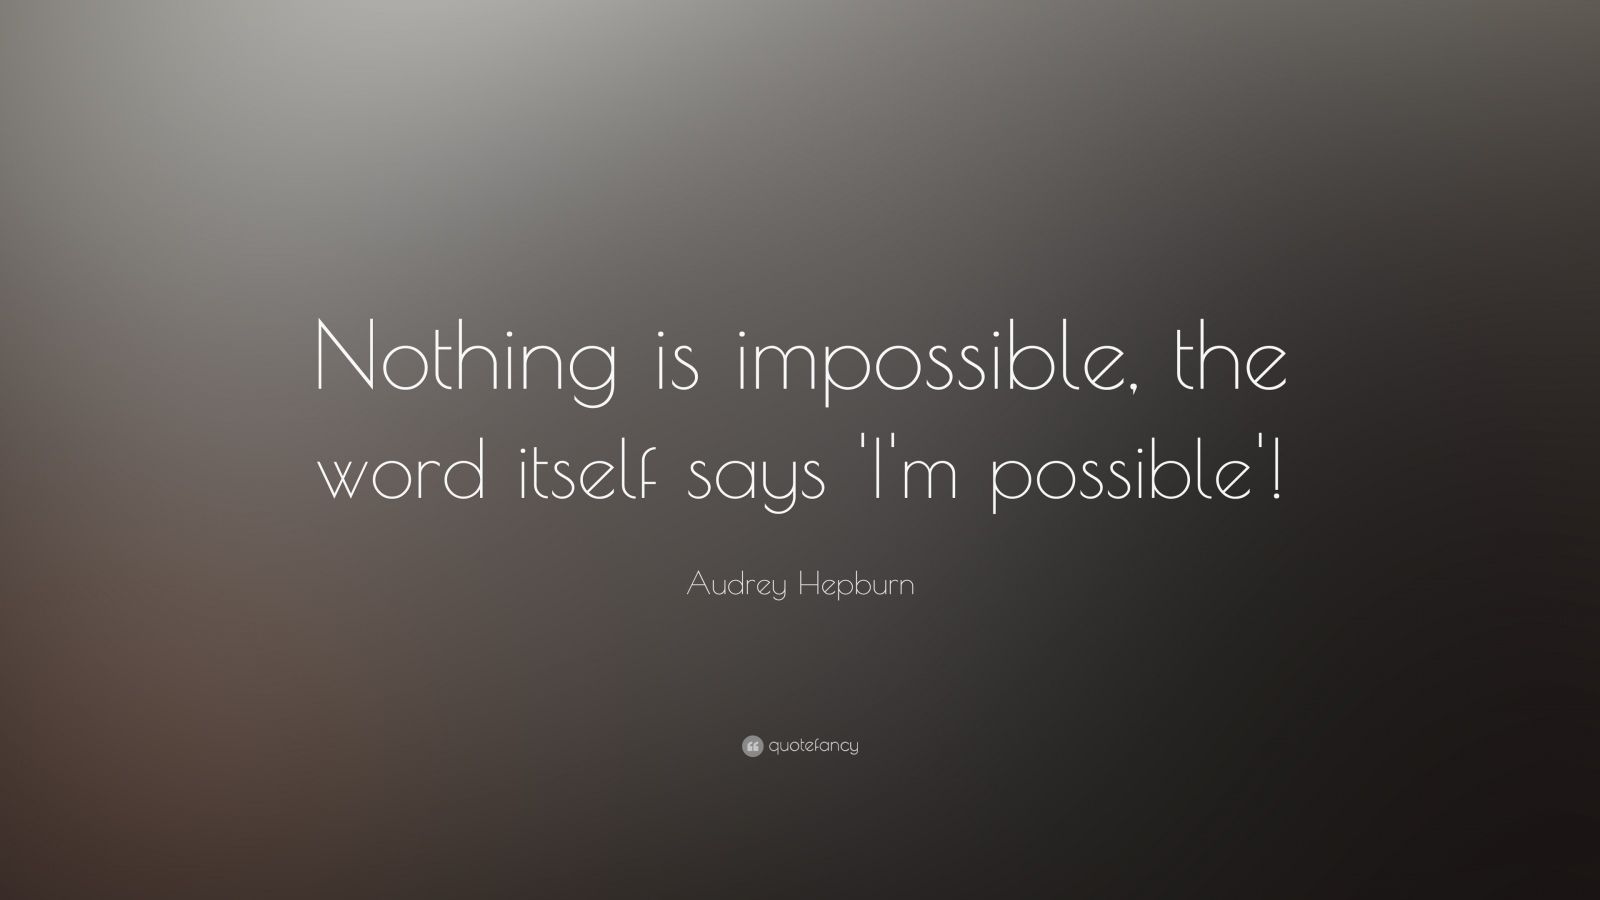 Audrey Hepburn Quote: “Nothing is impossible, the word itself says 'I'm possible'!” (7 wallpaper)